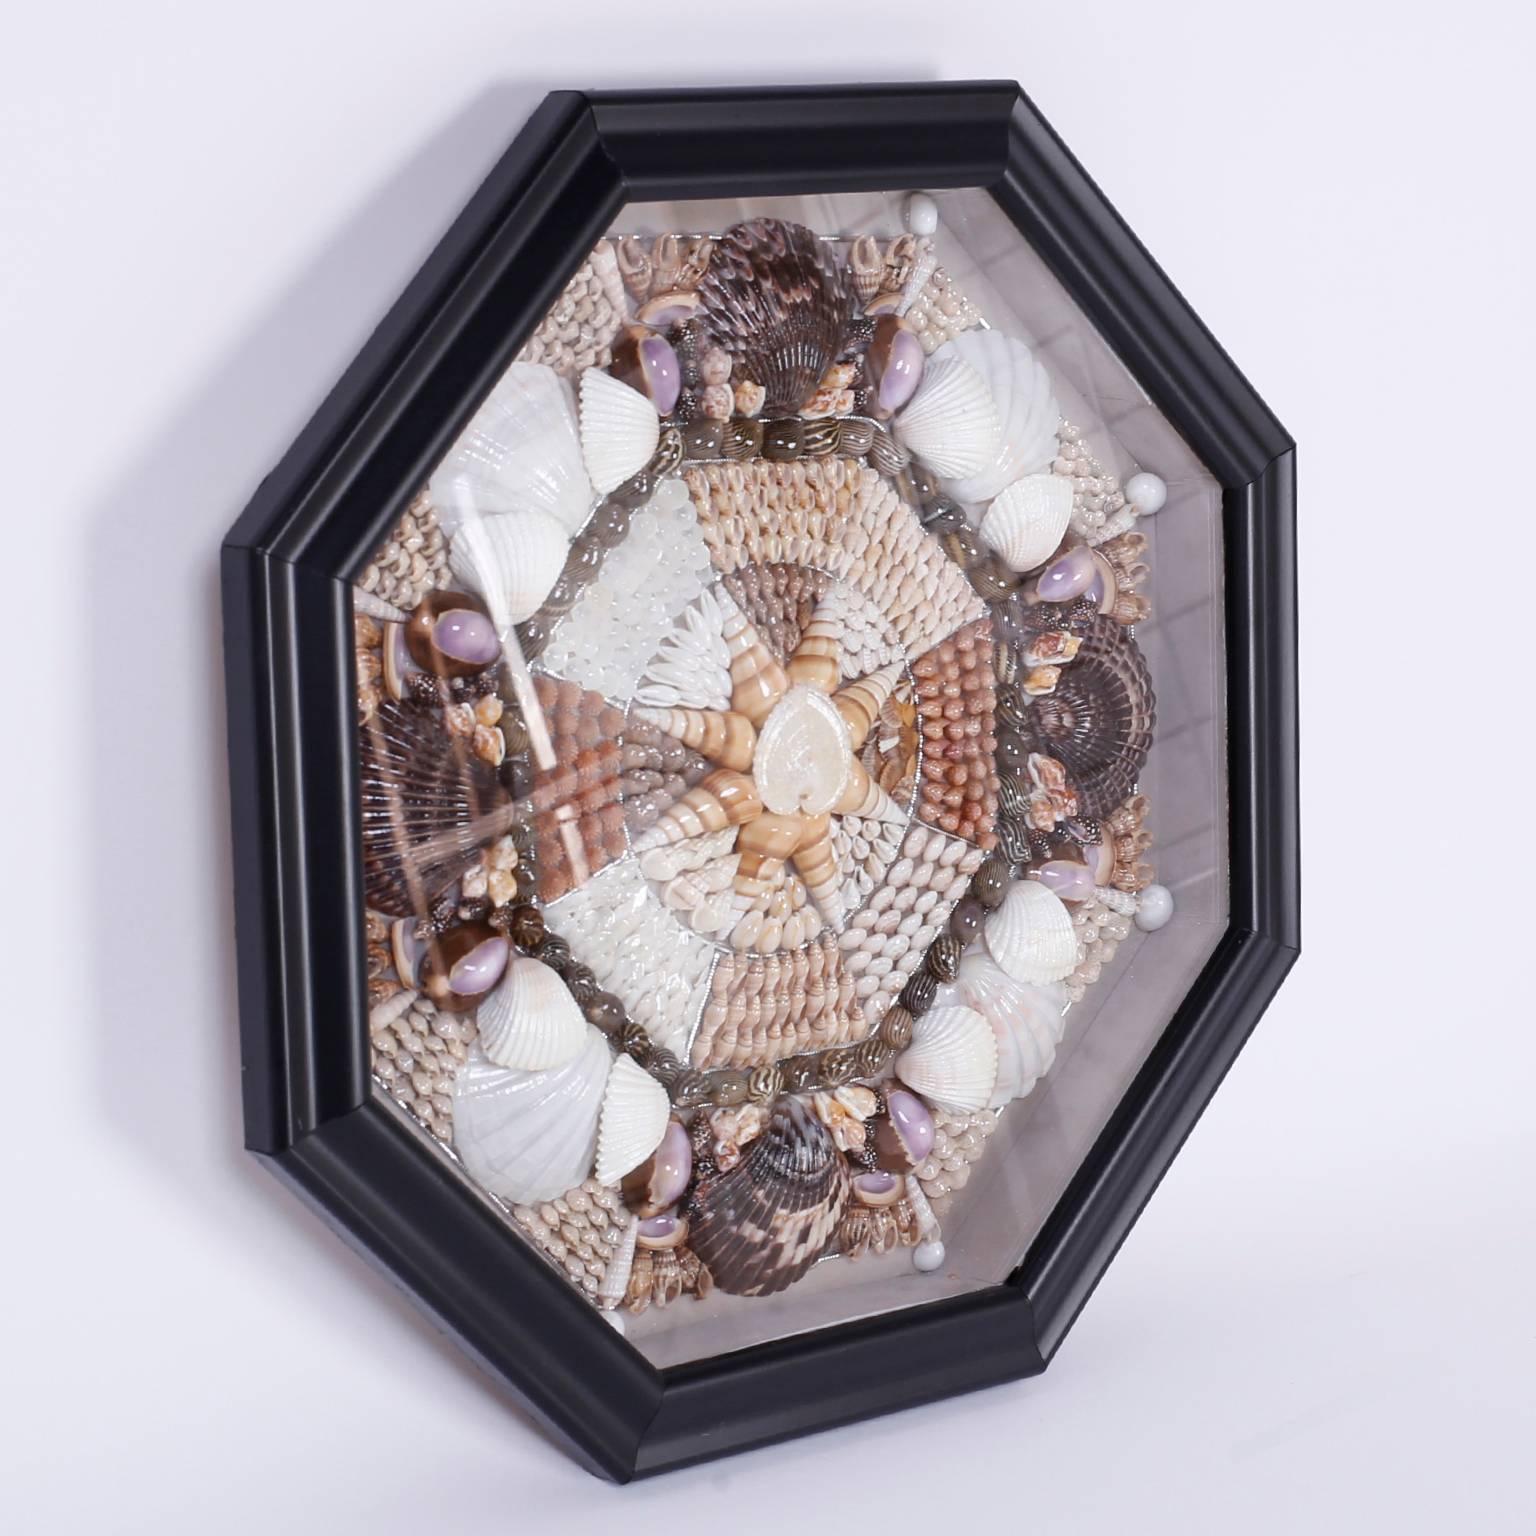 Sailors Valentine crafted with patience and care as a romantic offering displaying sea shells in a dynamic kaleidoscope pattern using multiple specimens.